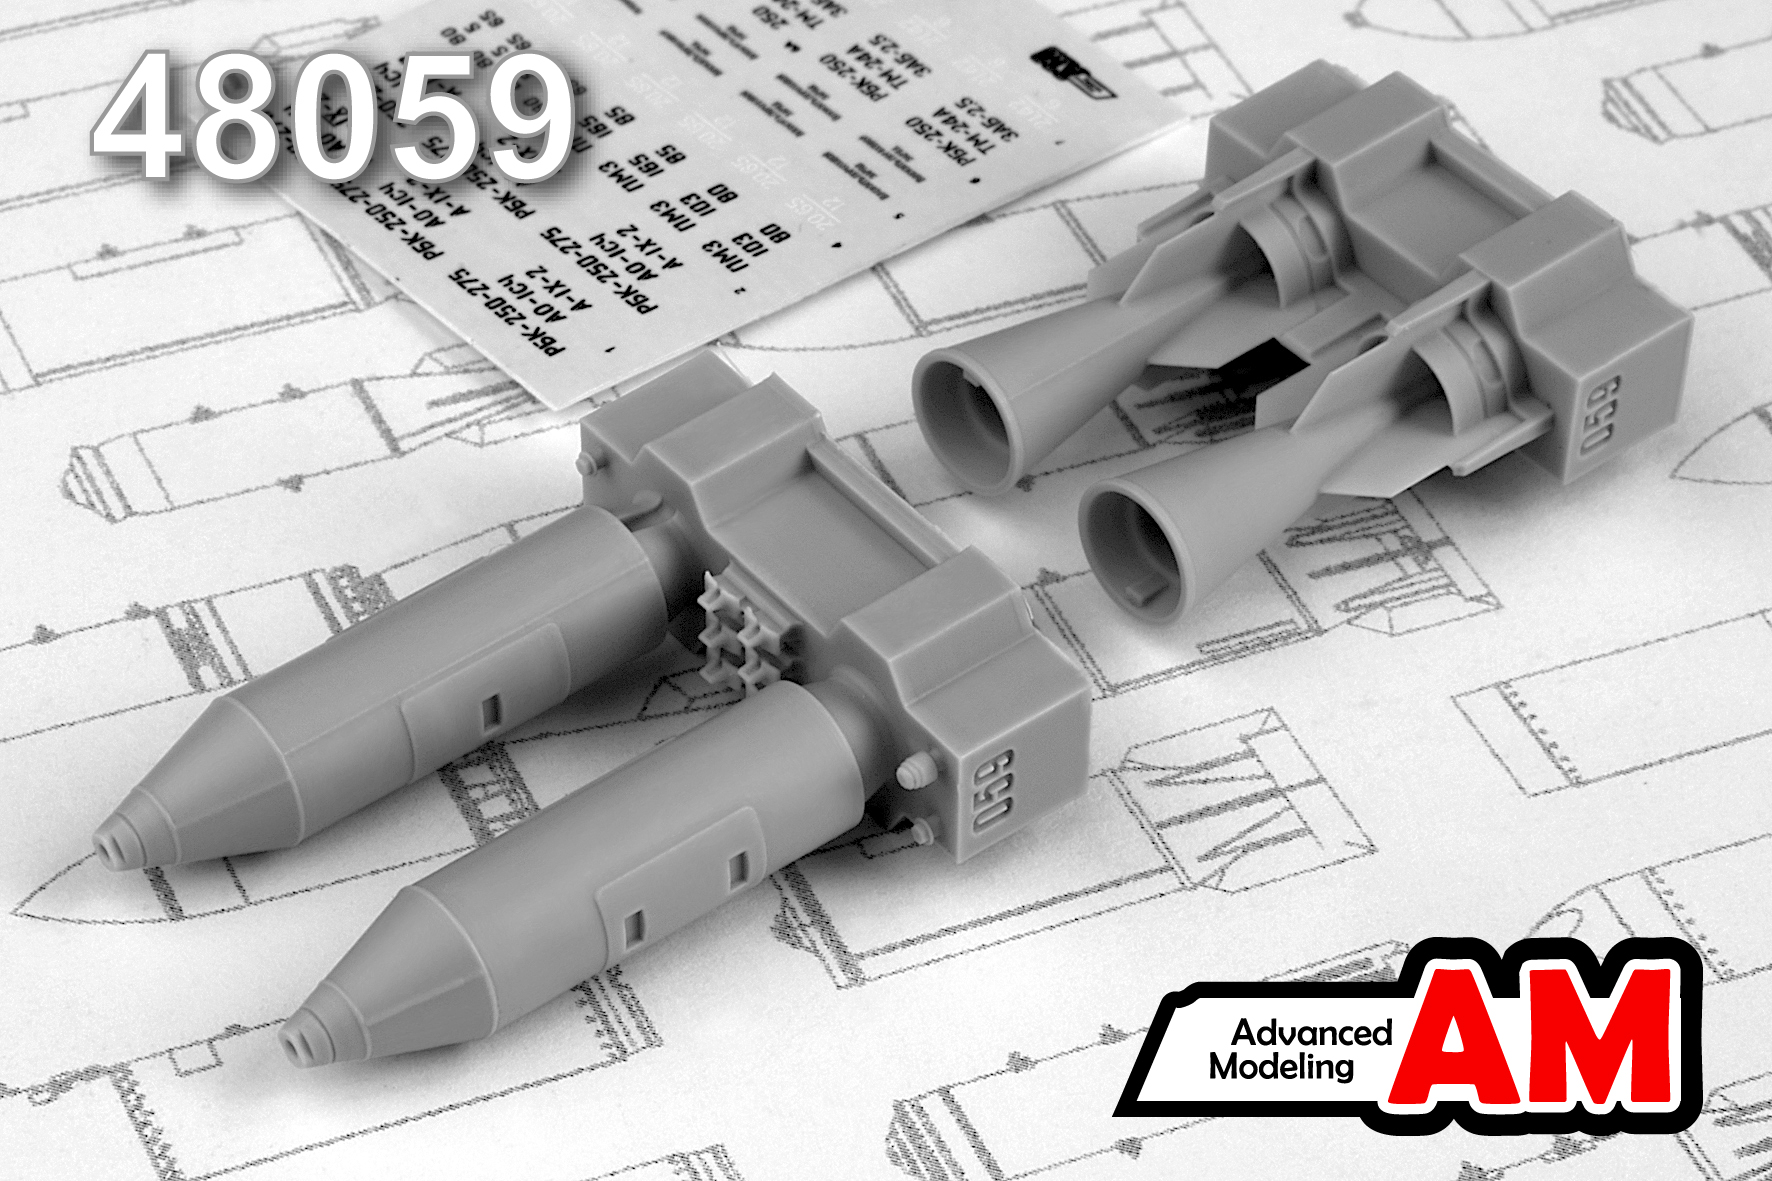 RBK-250-275 AO-1 250kg Cluster Bomb (for pre-order with PRE-QNT4001 only)